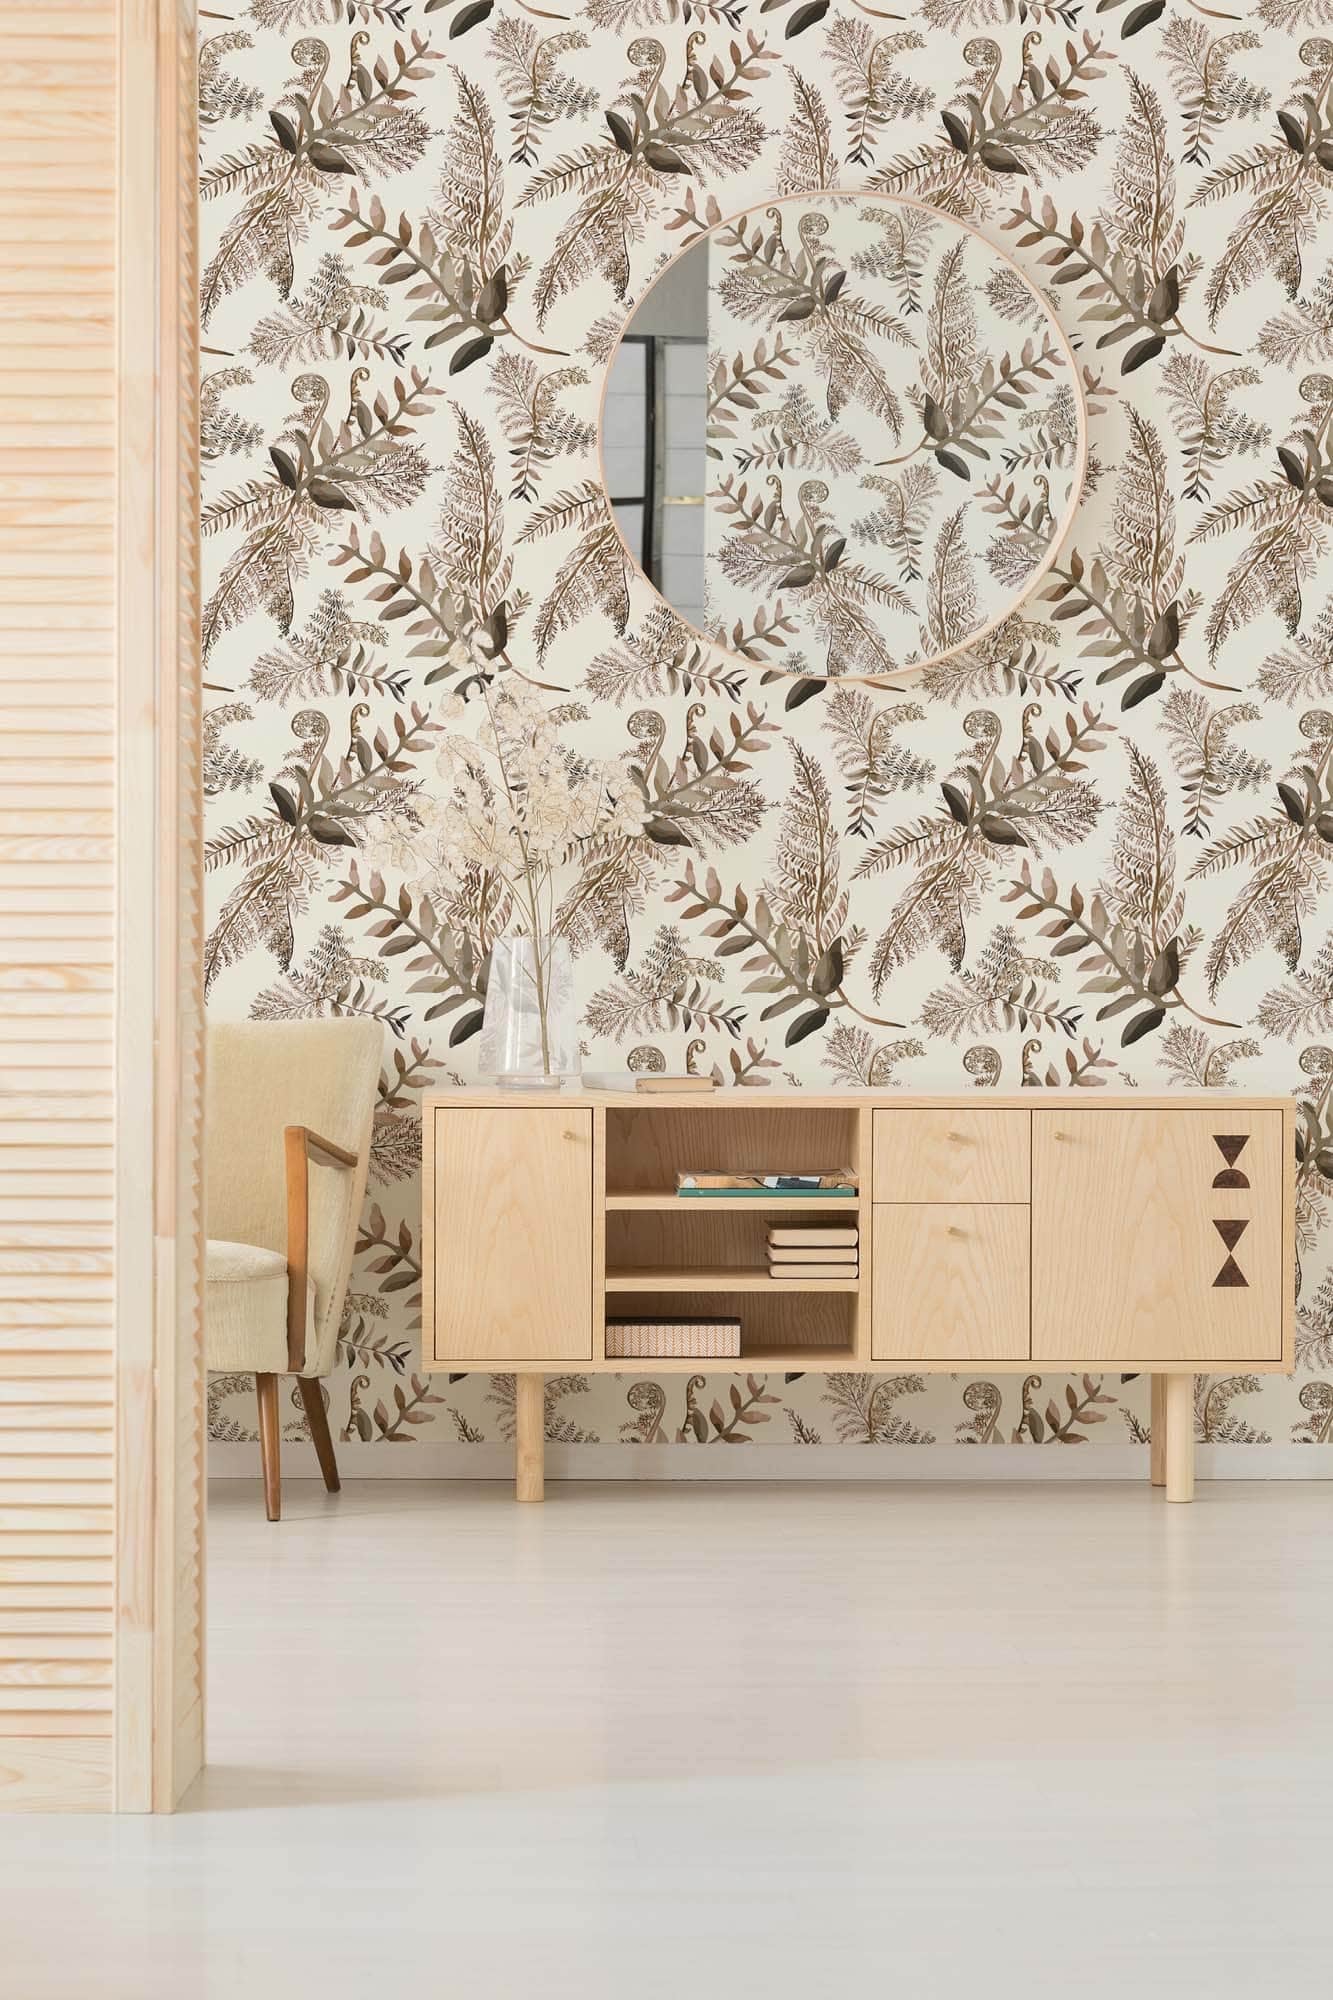 Camper or Home Wallpaper - Neutral Fern Peel and Stick or Traditional Wallpaper